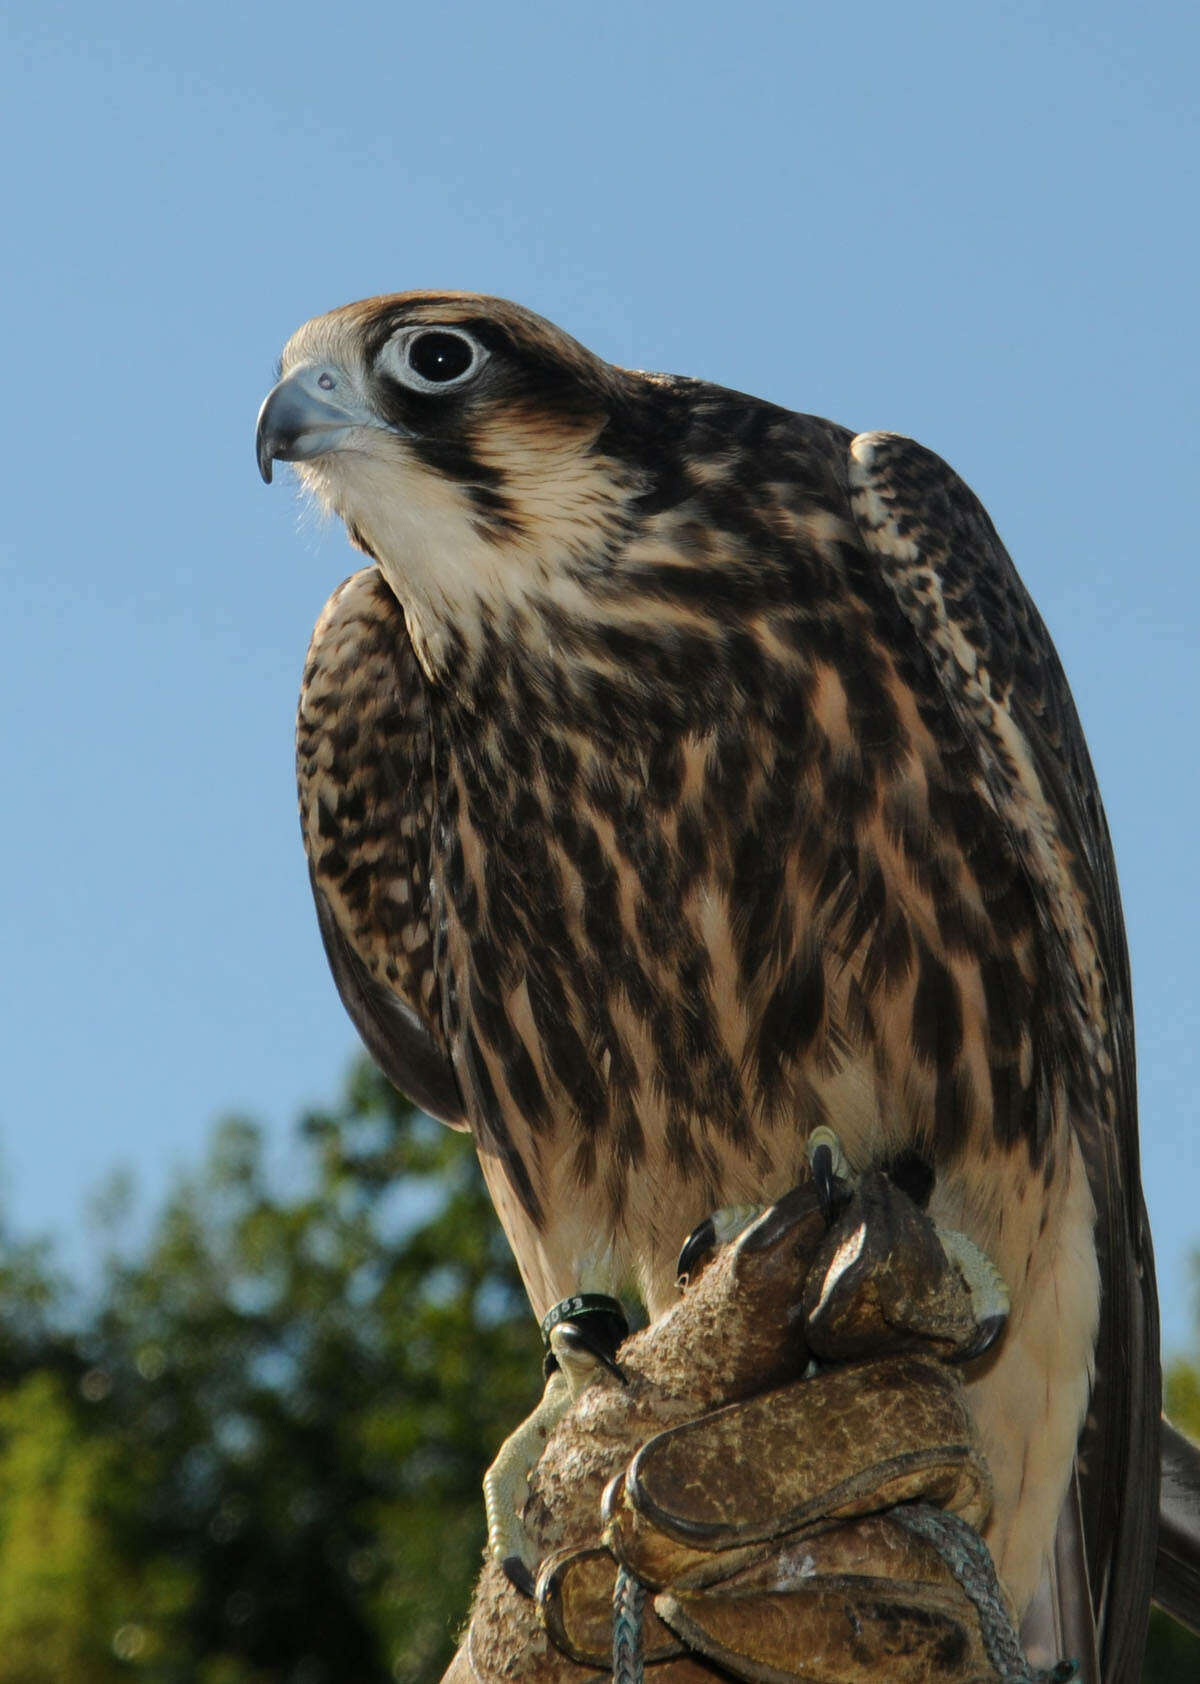 2015: Peregrine 1. Traveling from place to place. Merriam-Webster Online